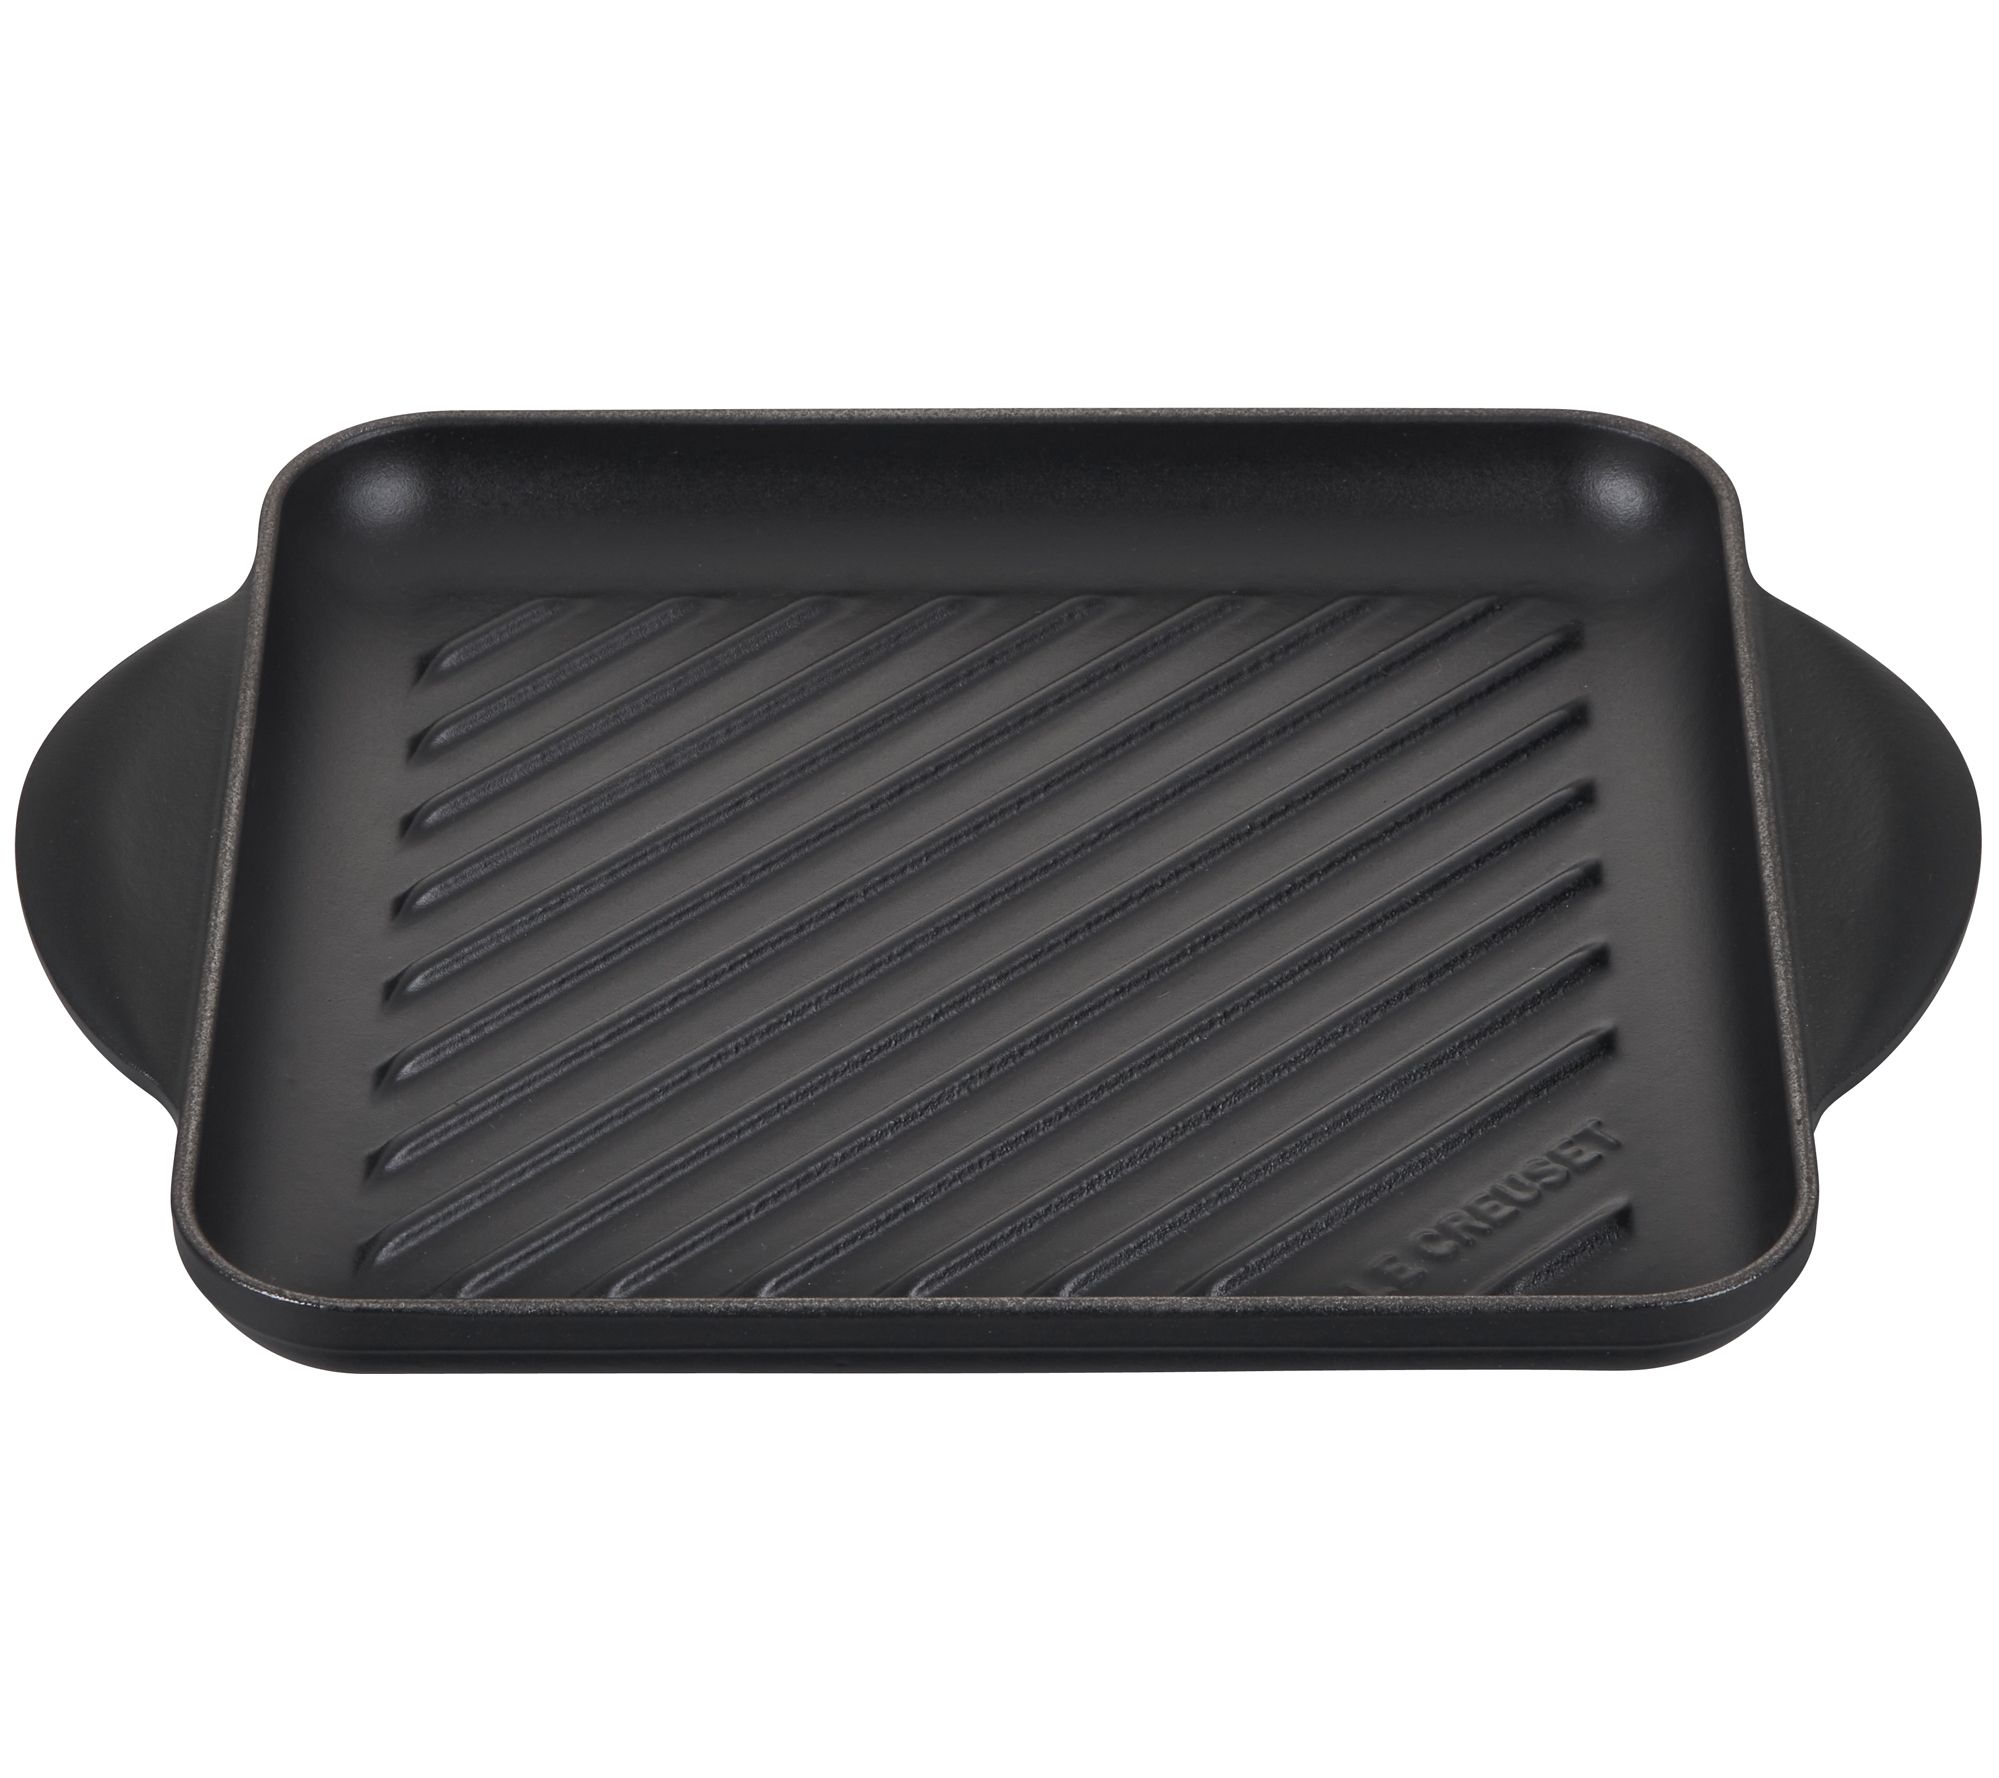 Le Creuset Grill Pan 